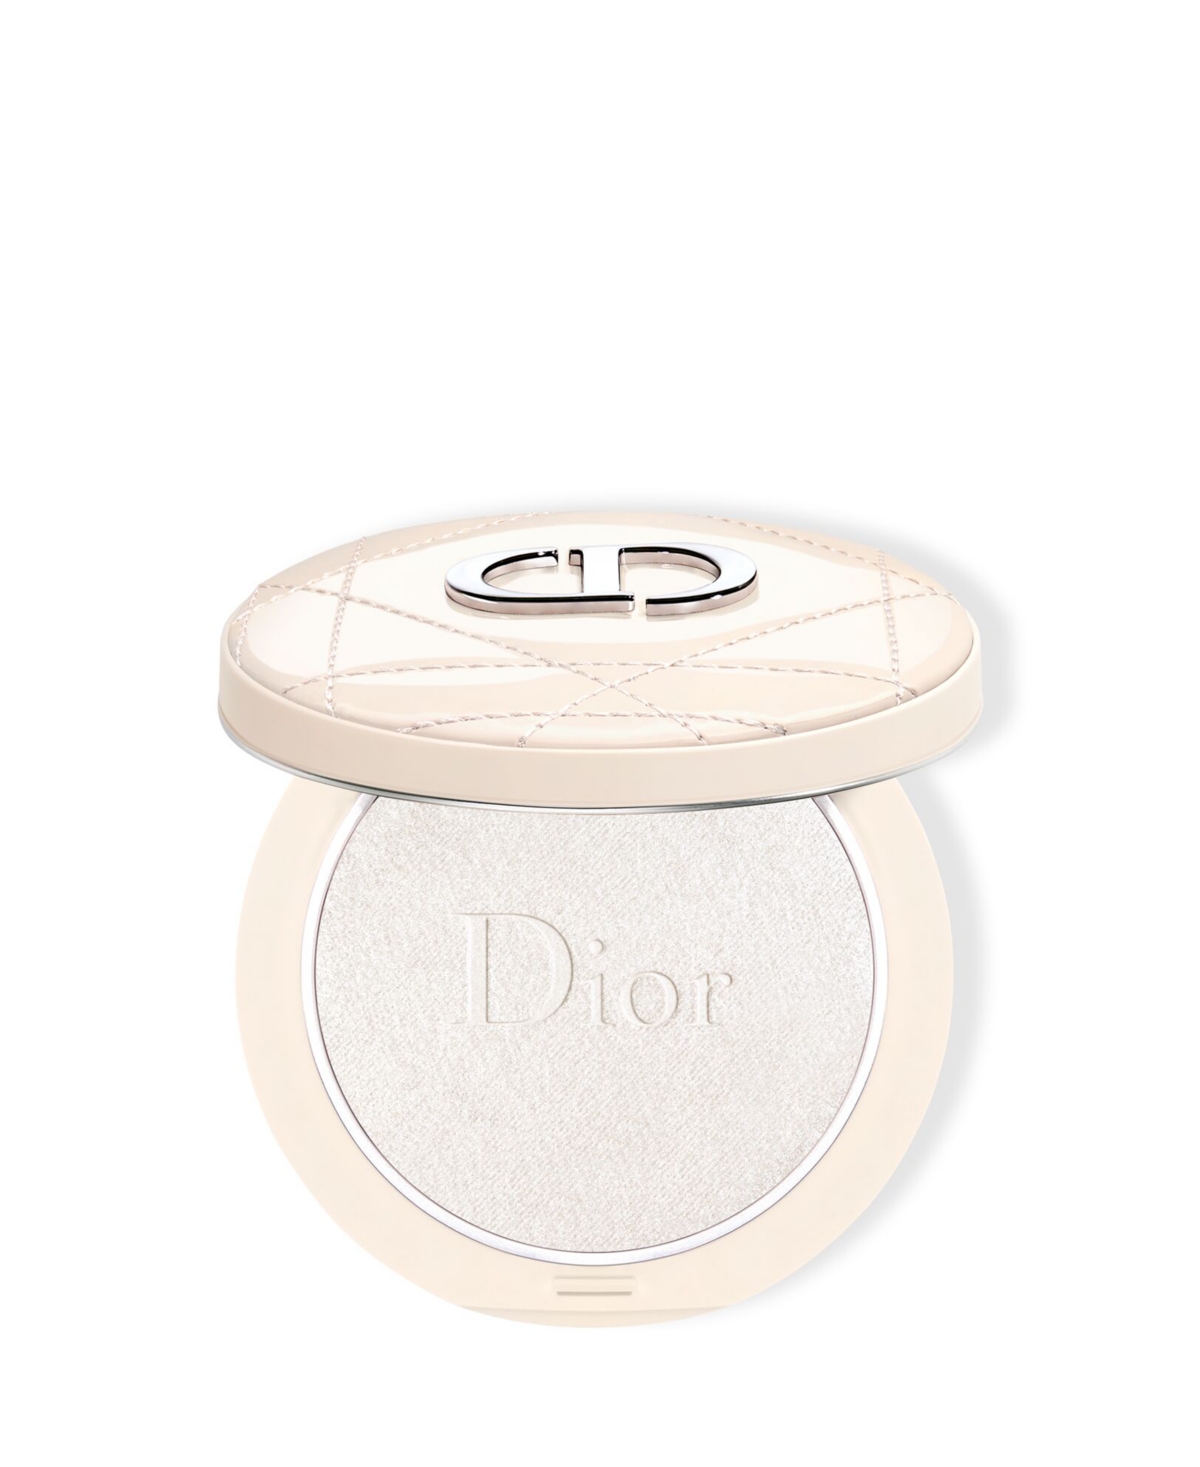 Dior Forever Couture Luminizer Highlighter Powder In Pearlescent Glow